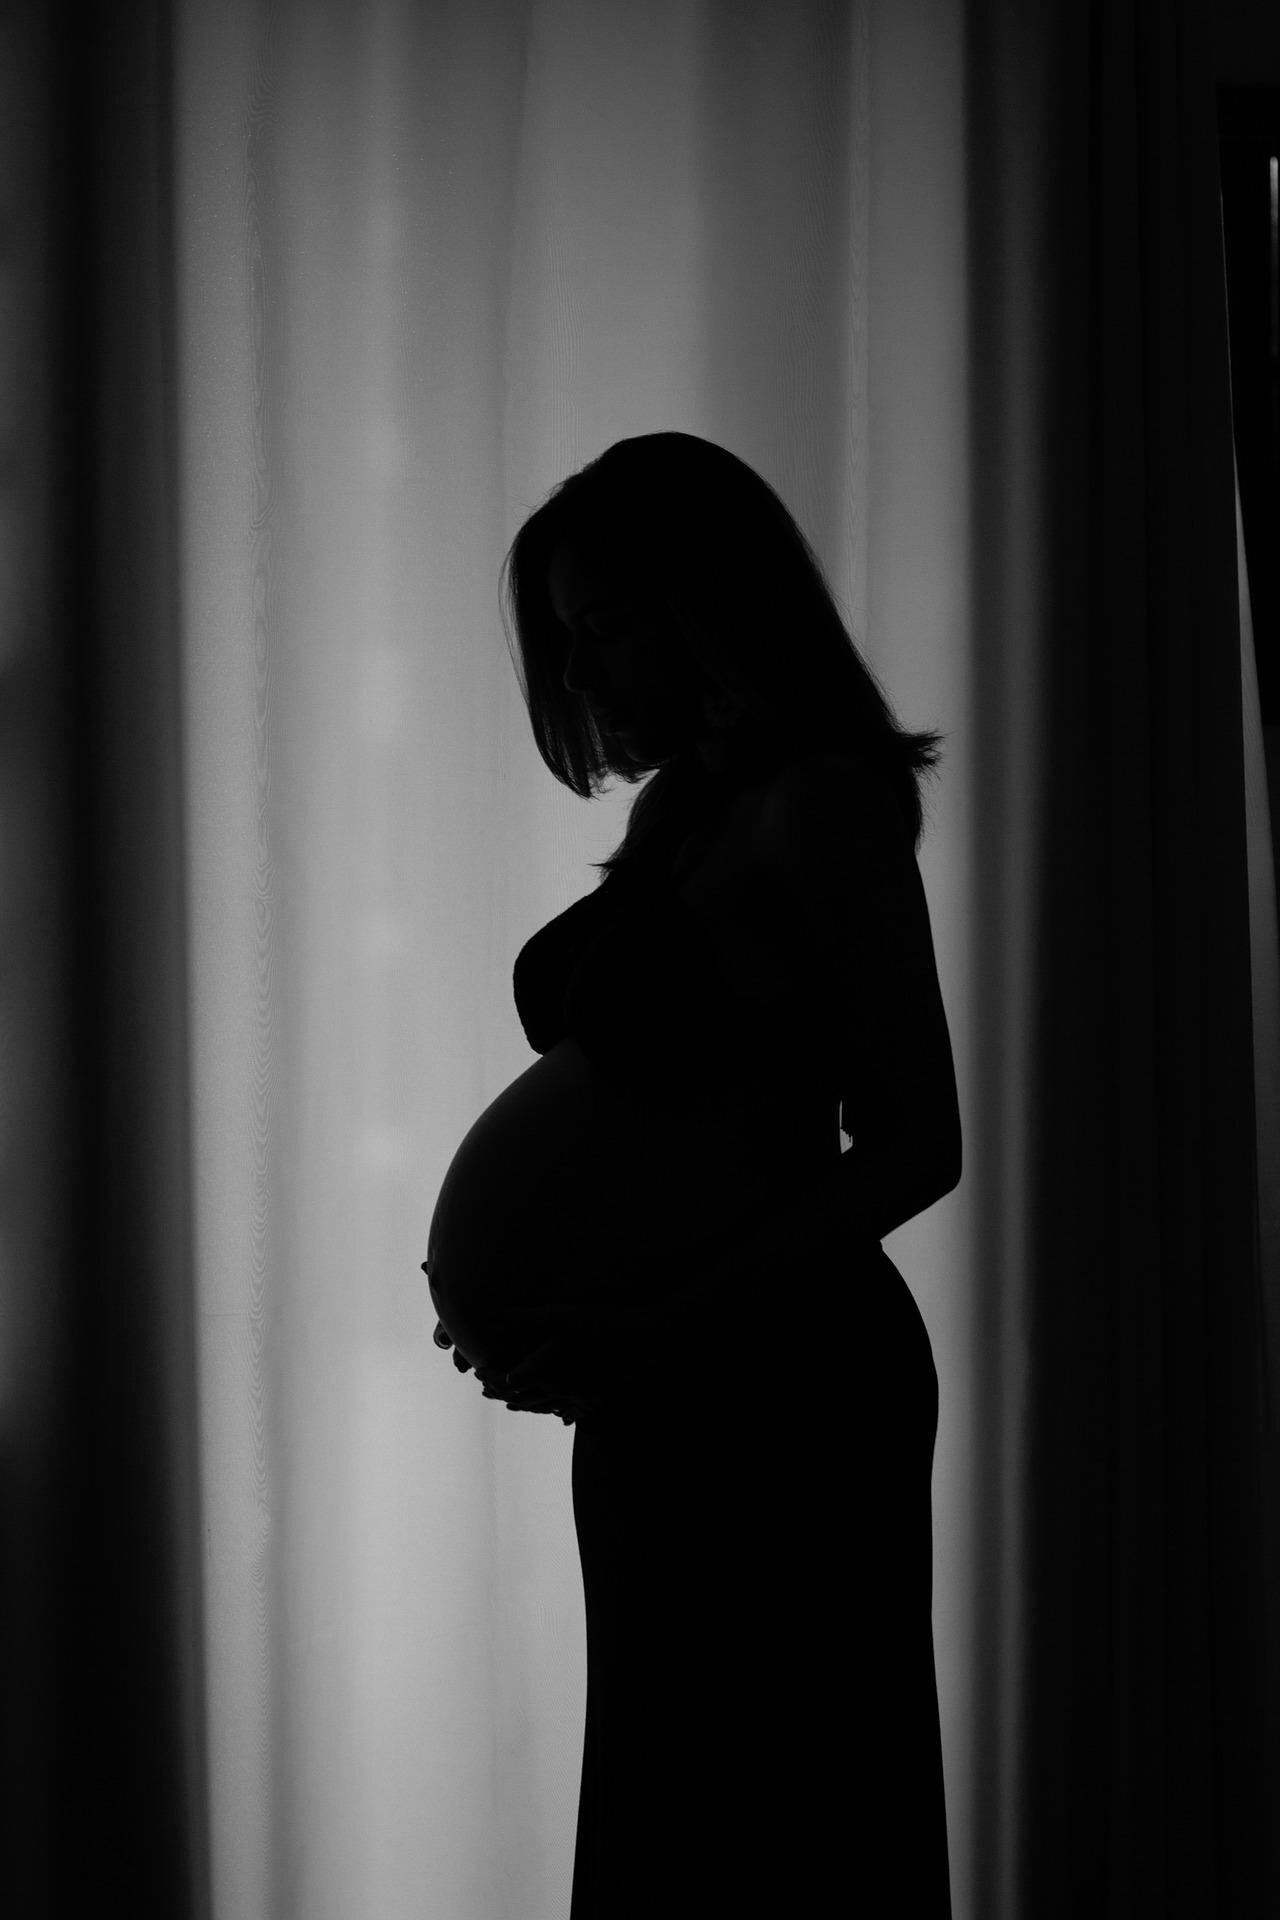 #Homicide is a leading cause of death in pregnant women in the US